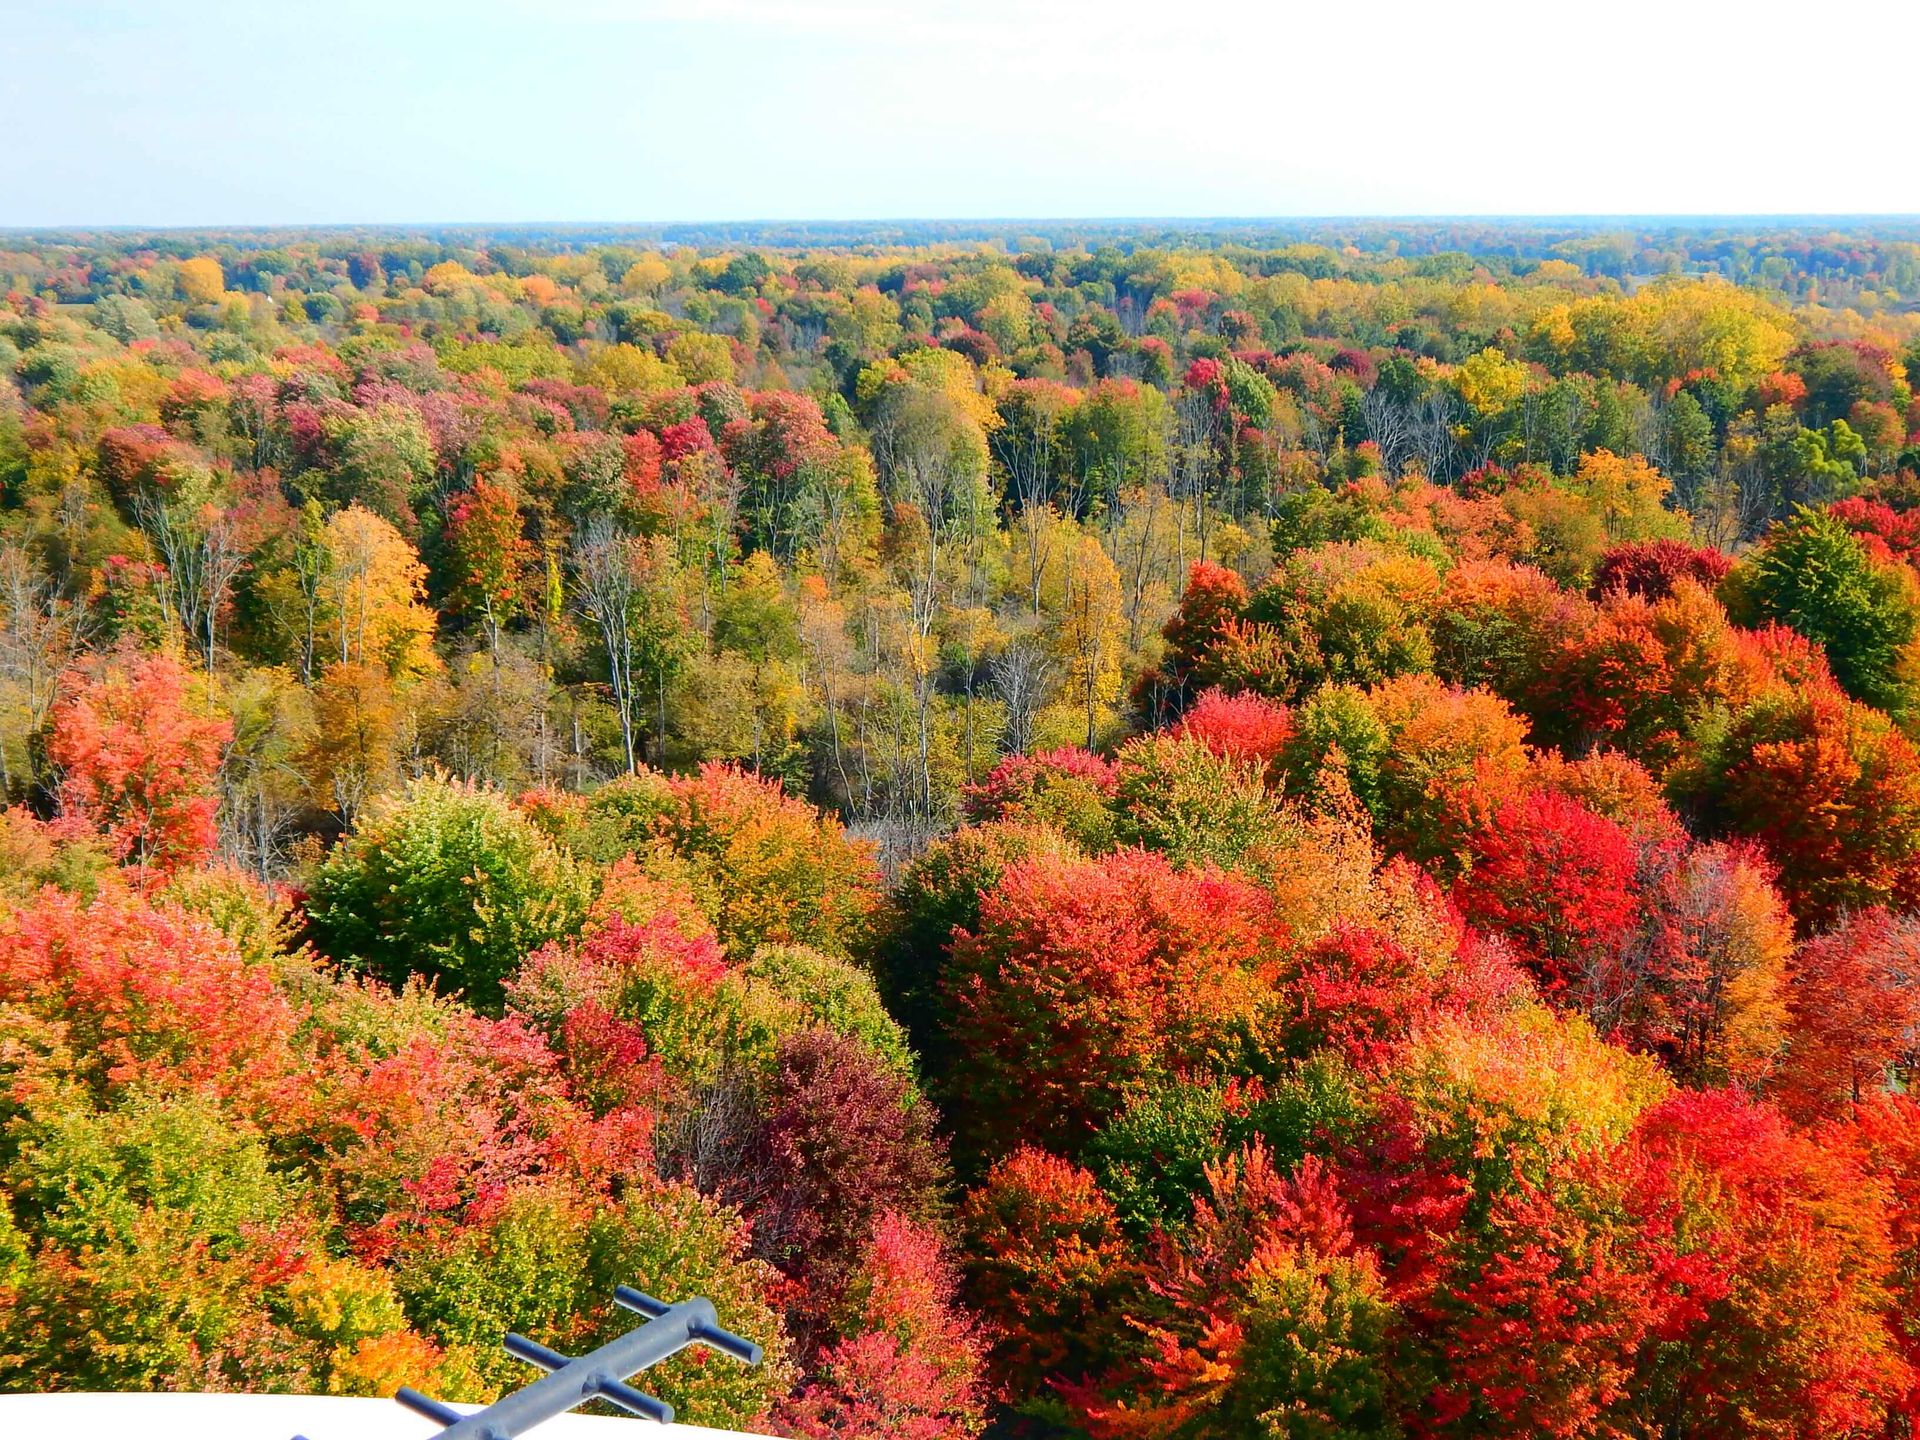 An aerial view of a forest with colorful leaves.